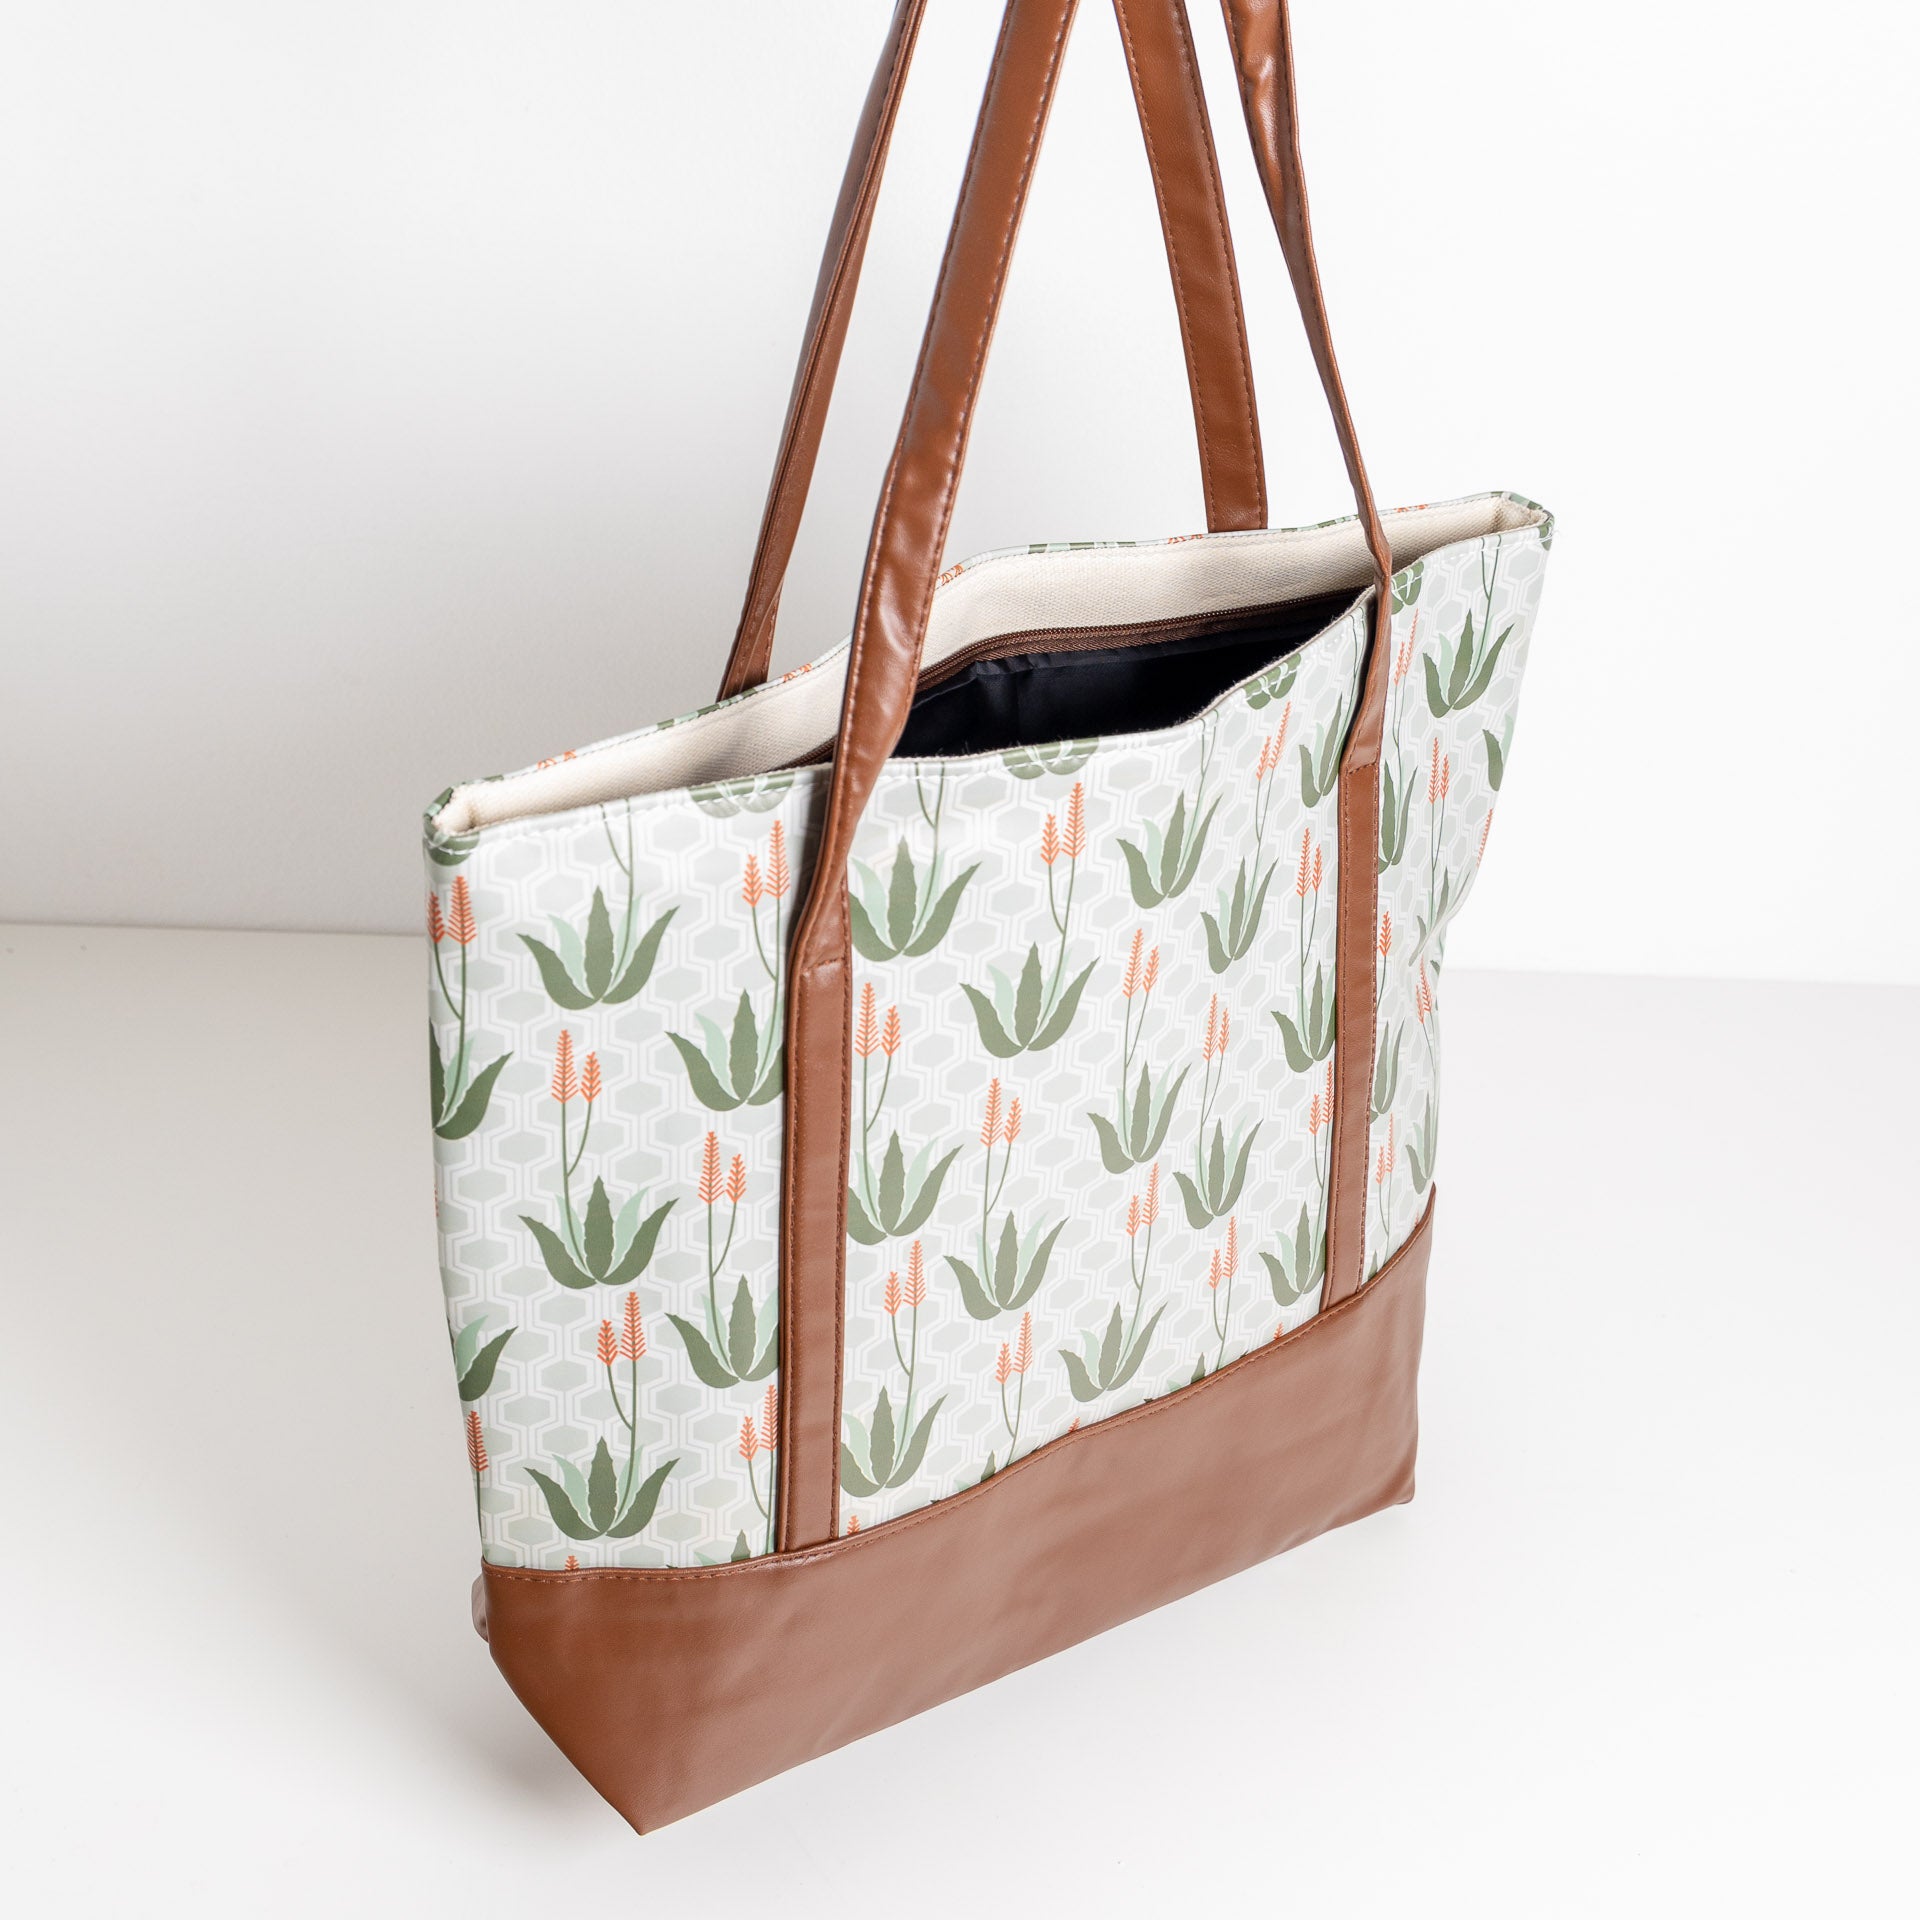 Out of Africa - Aloe Print Bags & Accessories (assorted styles)